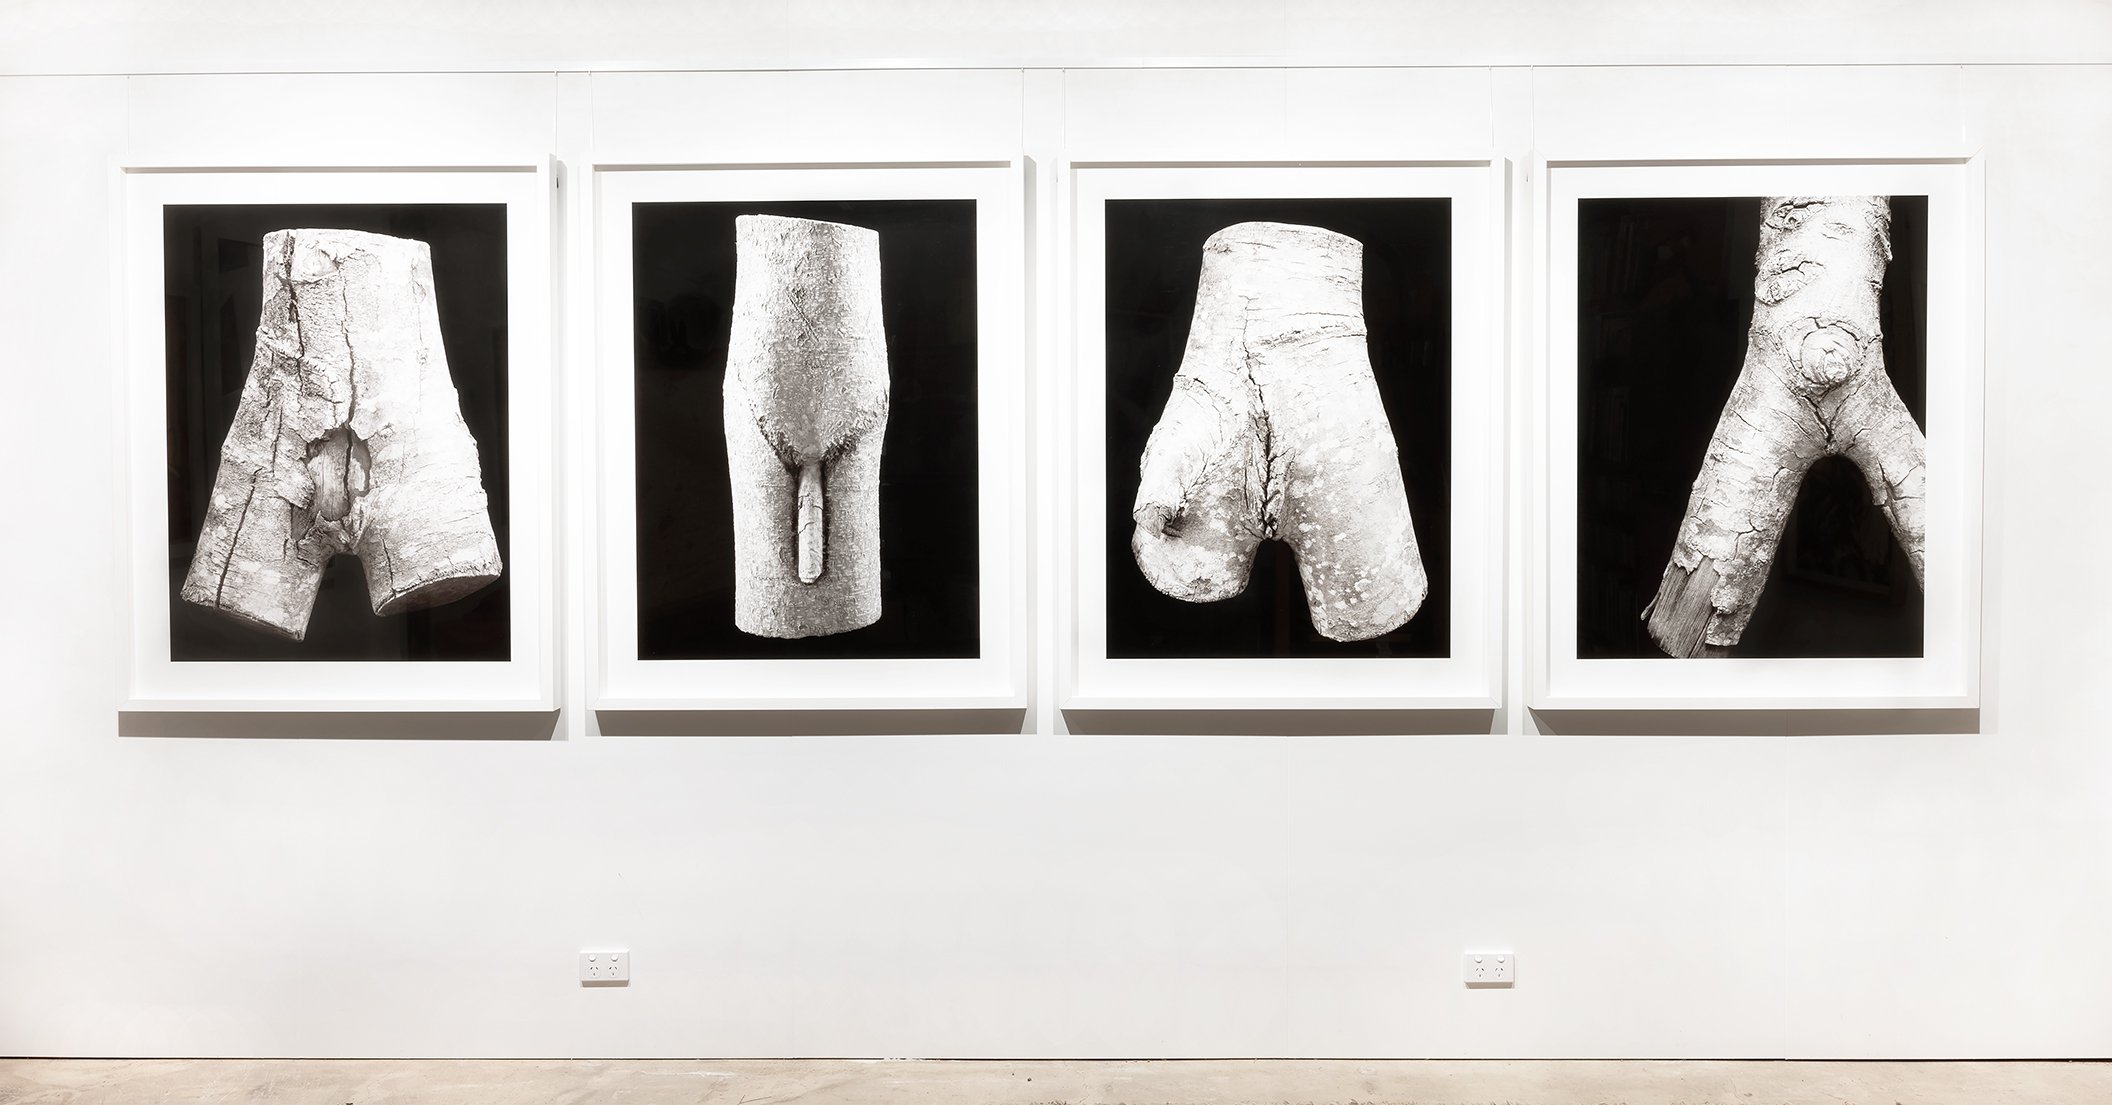    Wonders In The Woods  gallery   From The First Cultures Museum:  Fertility Fetishes 2,4,1,3 , 2015 Installation view133cm x 445cm  